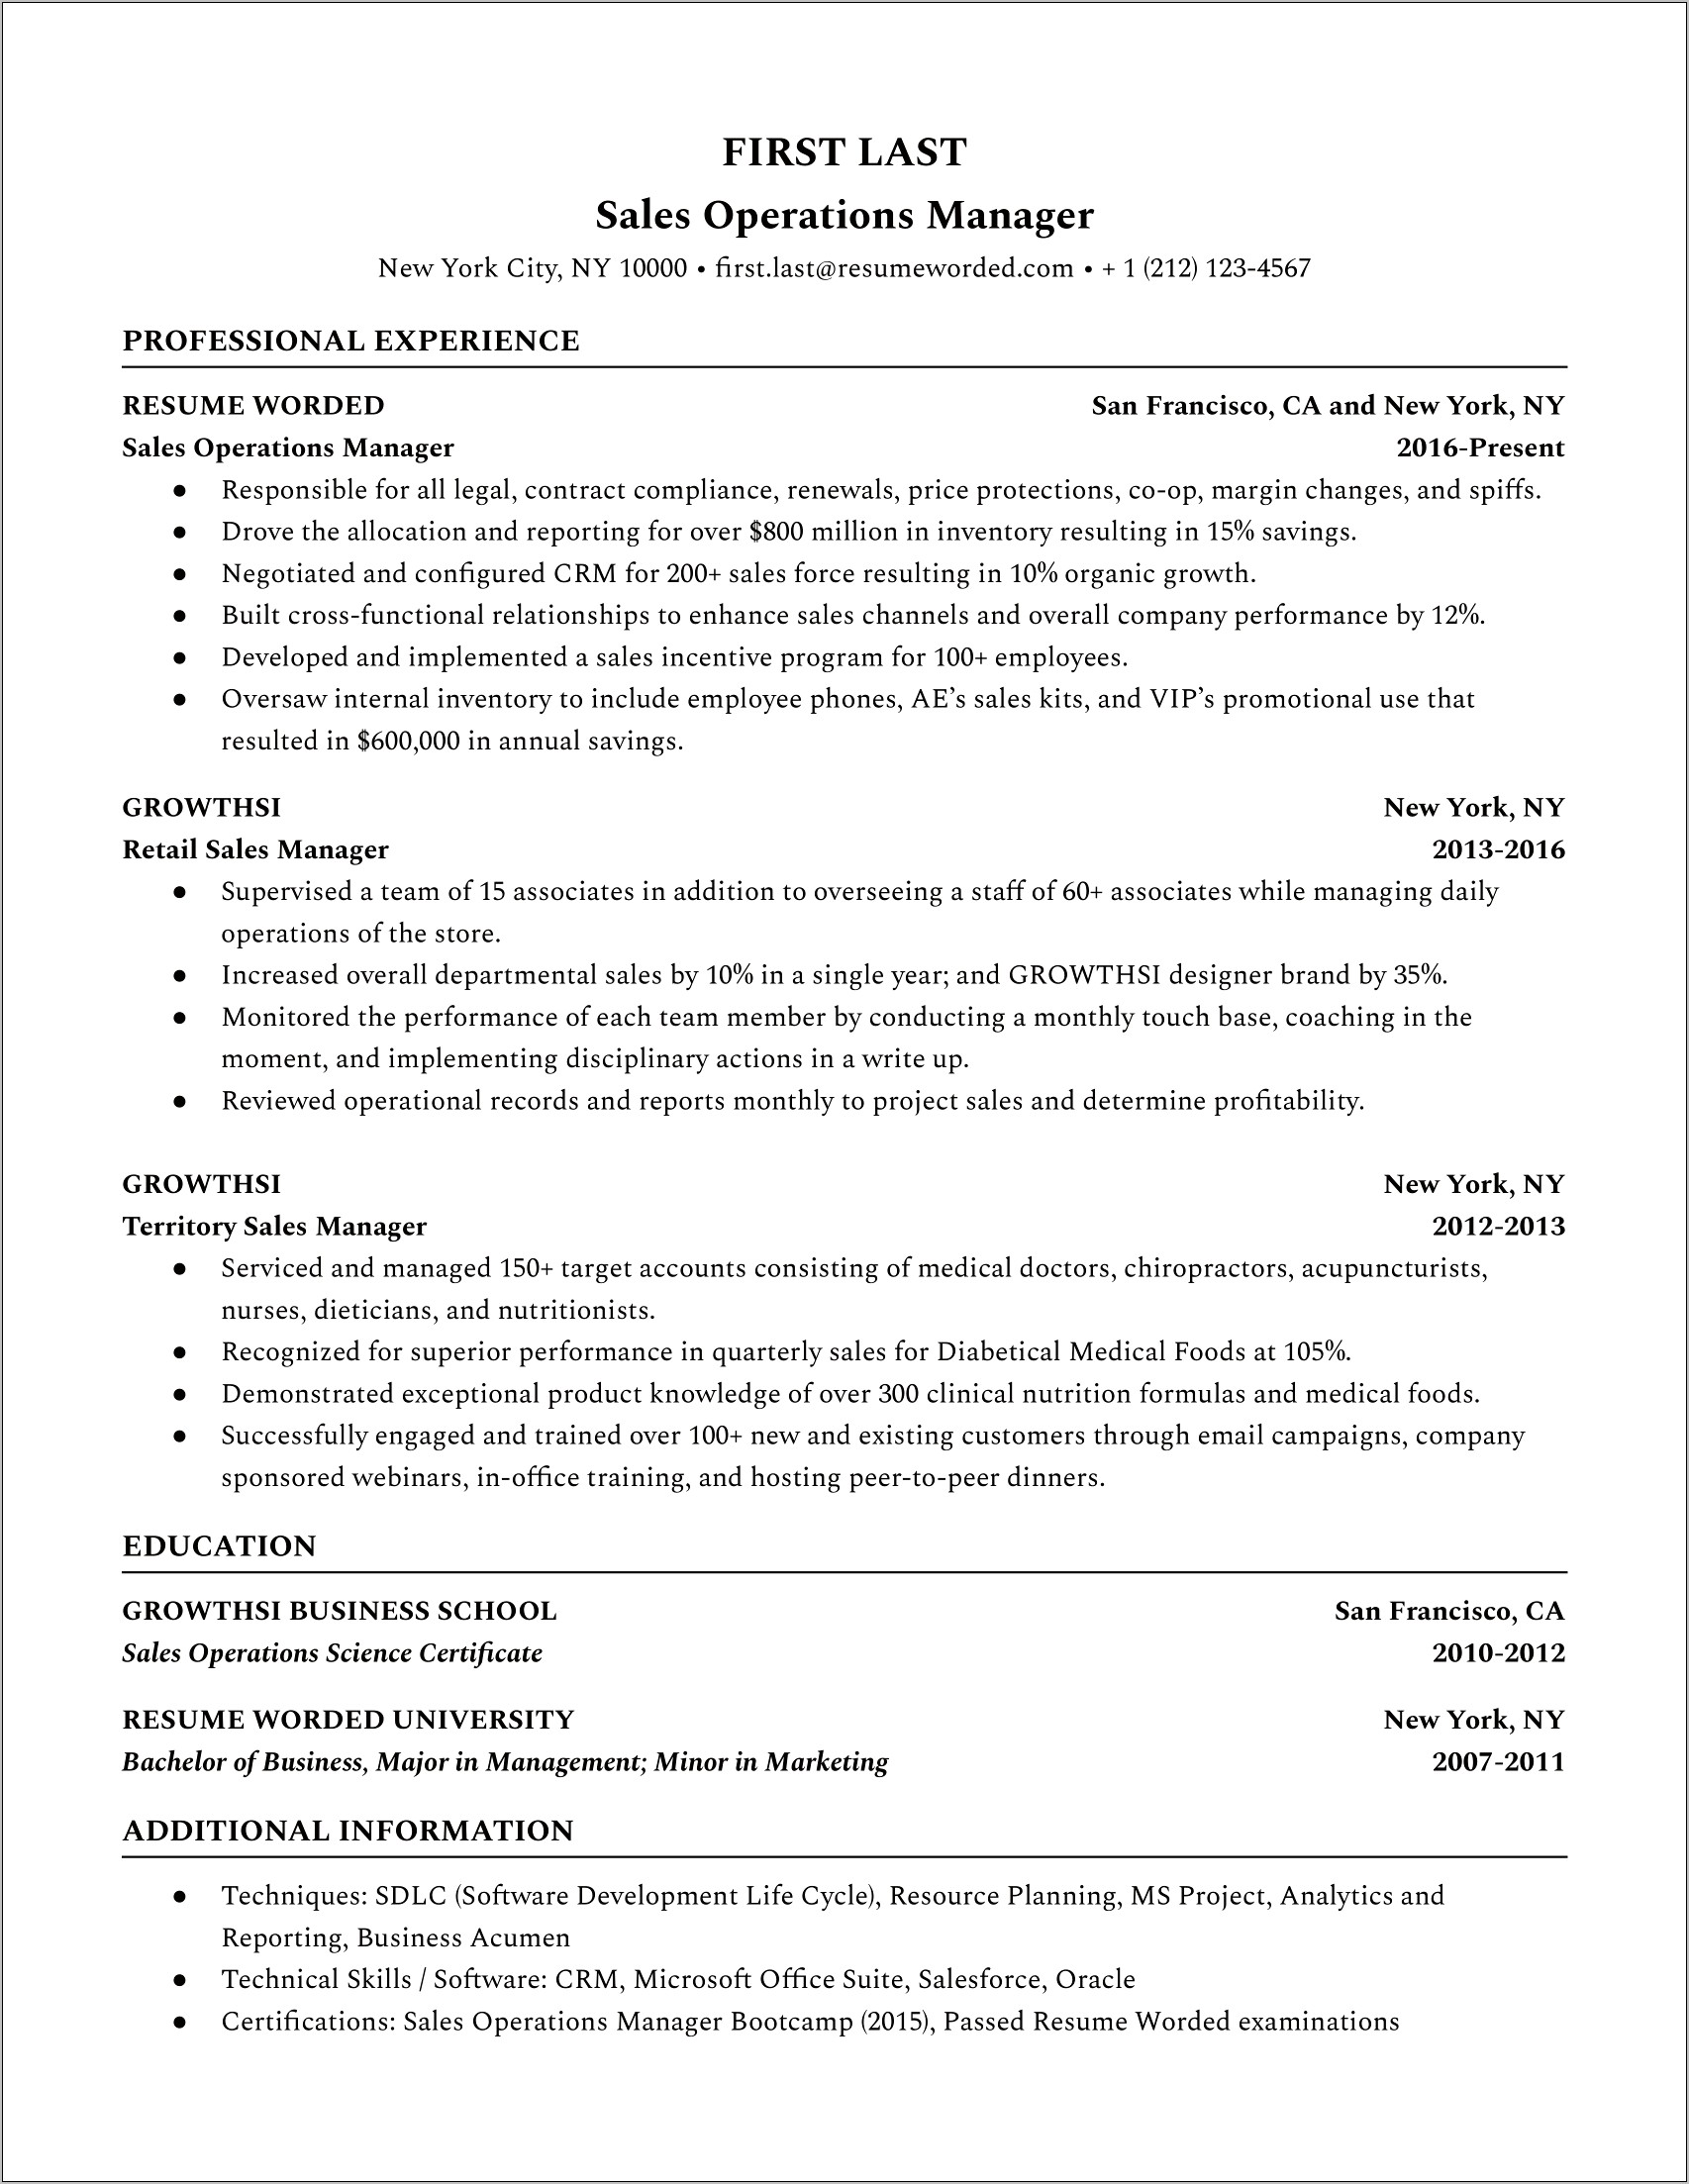 Resume For Sales Operations Manager